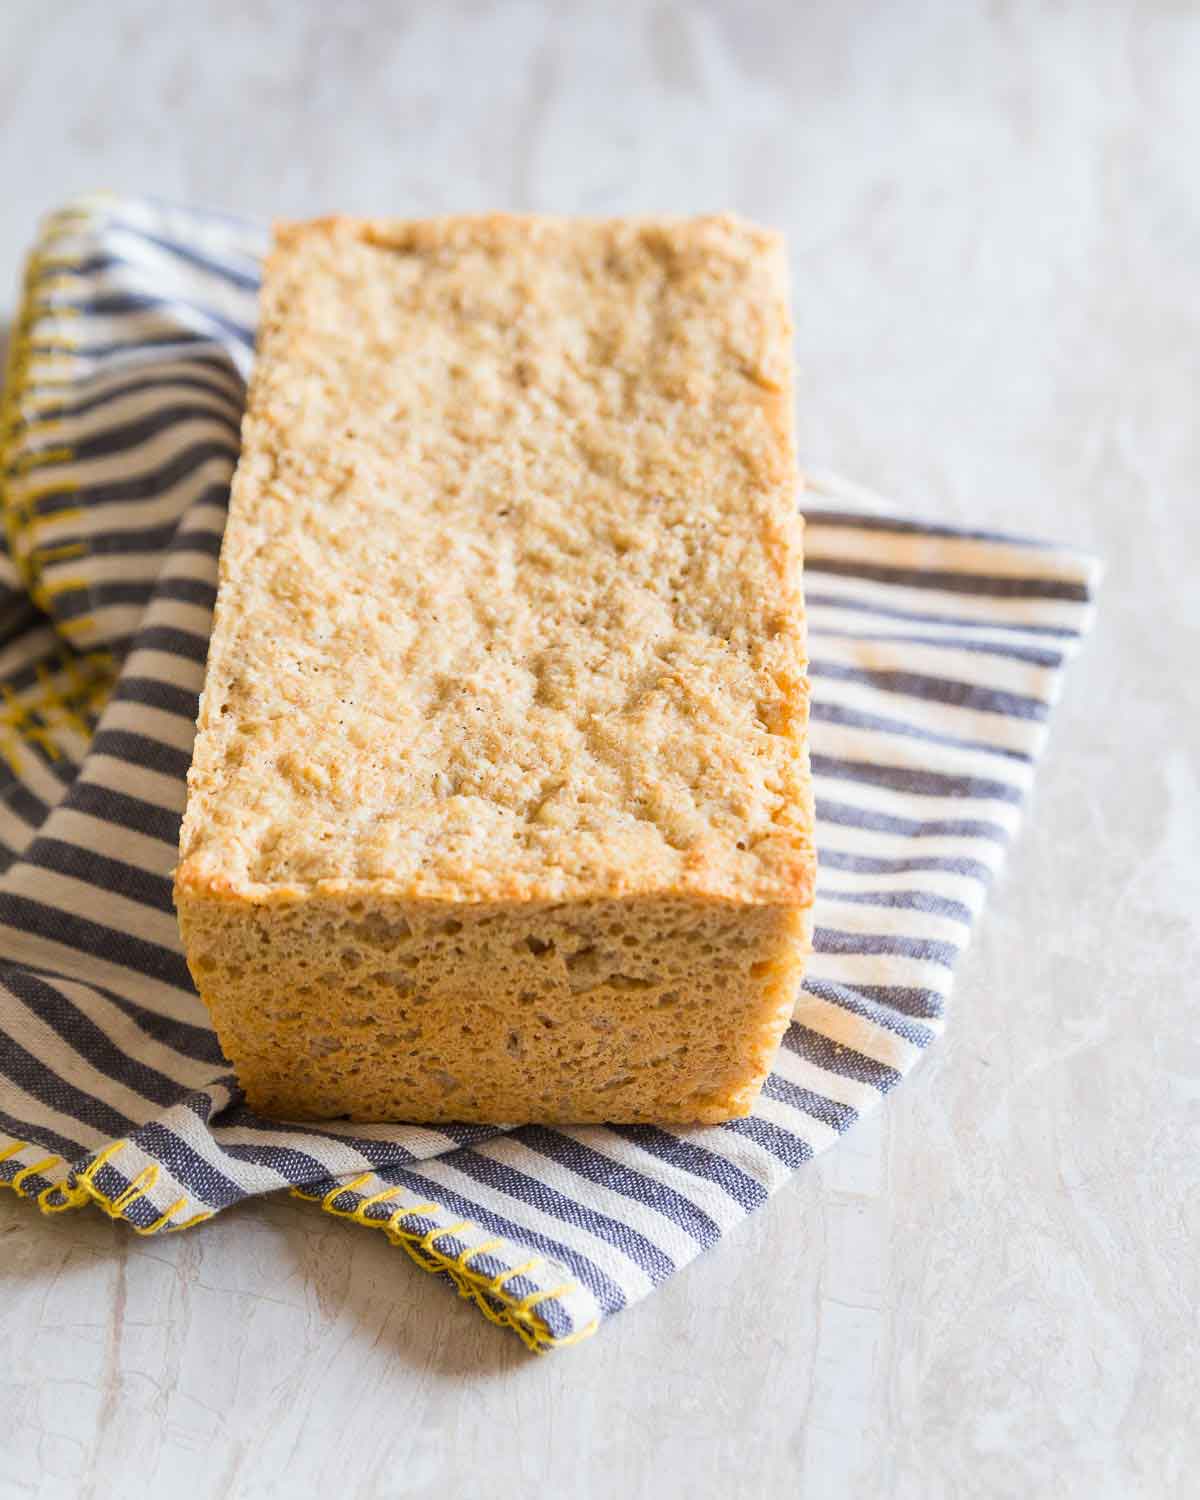 This simple recipe results in the best oat bread you can make at home.